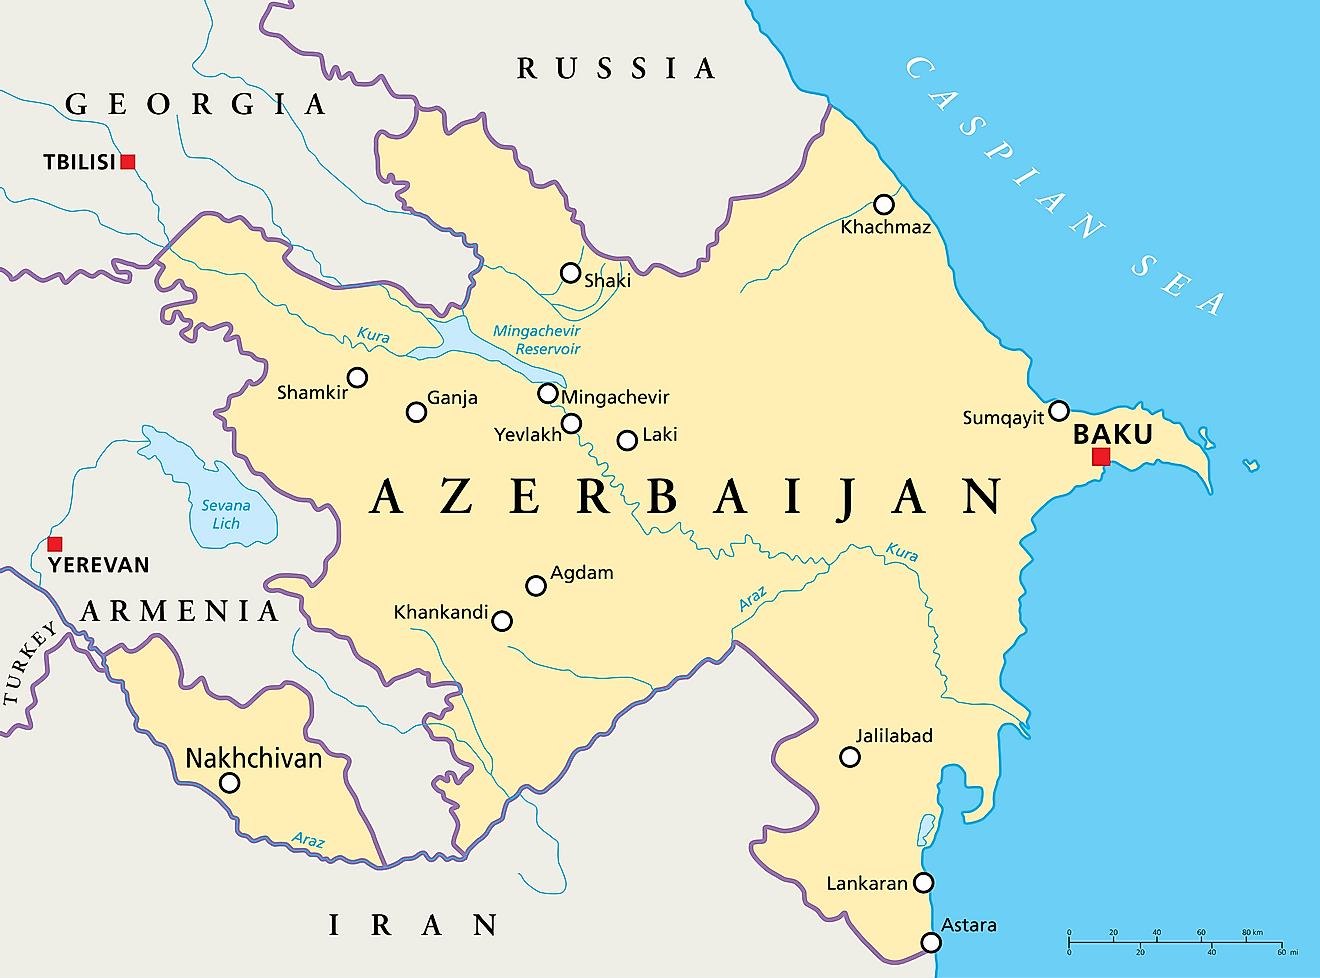 Nakhchivan, an exclave that is part of Azerbaijan.